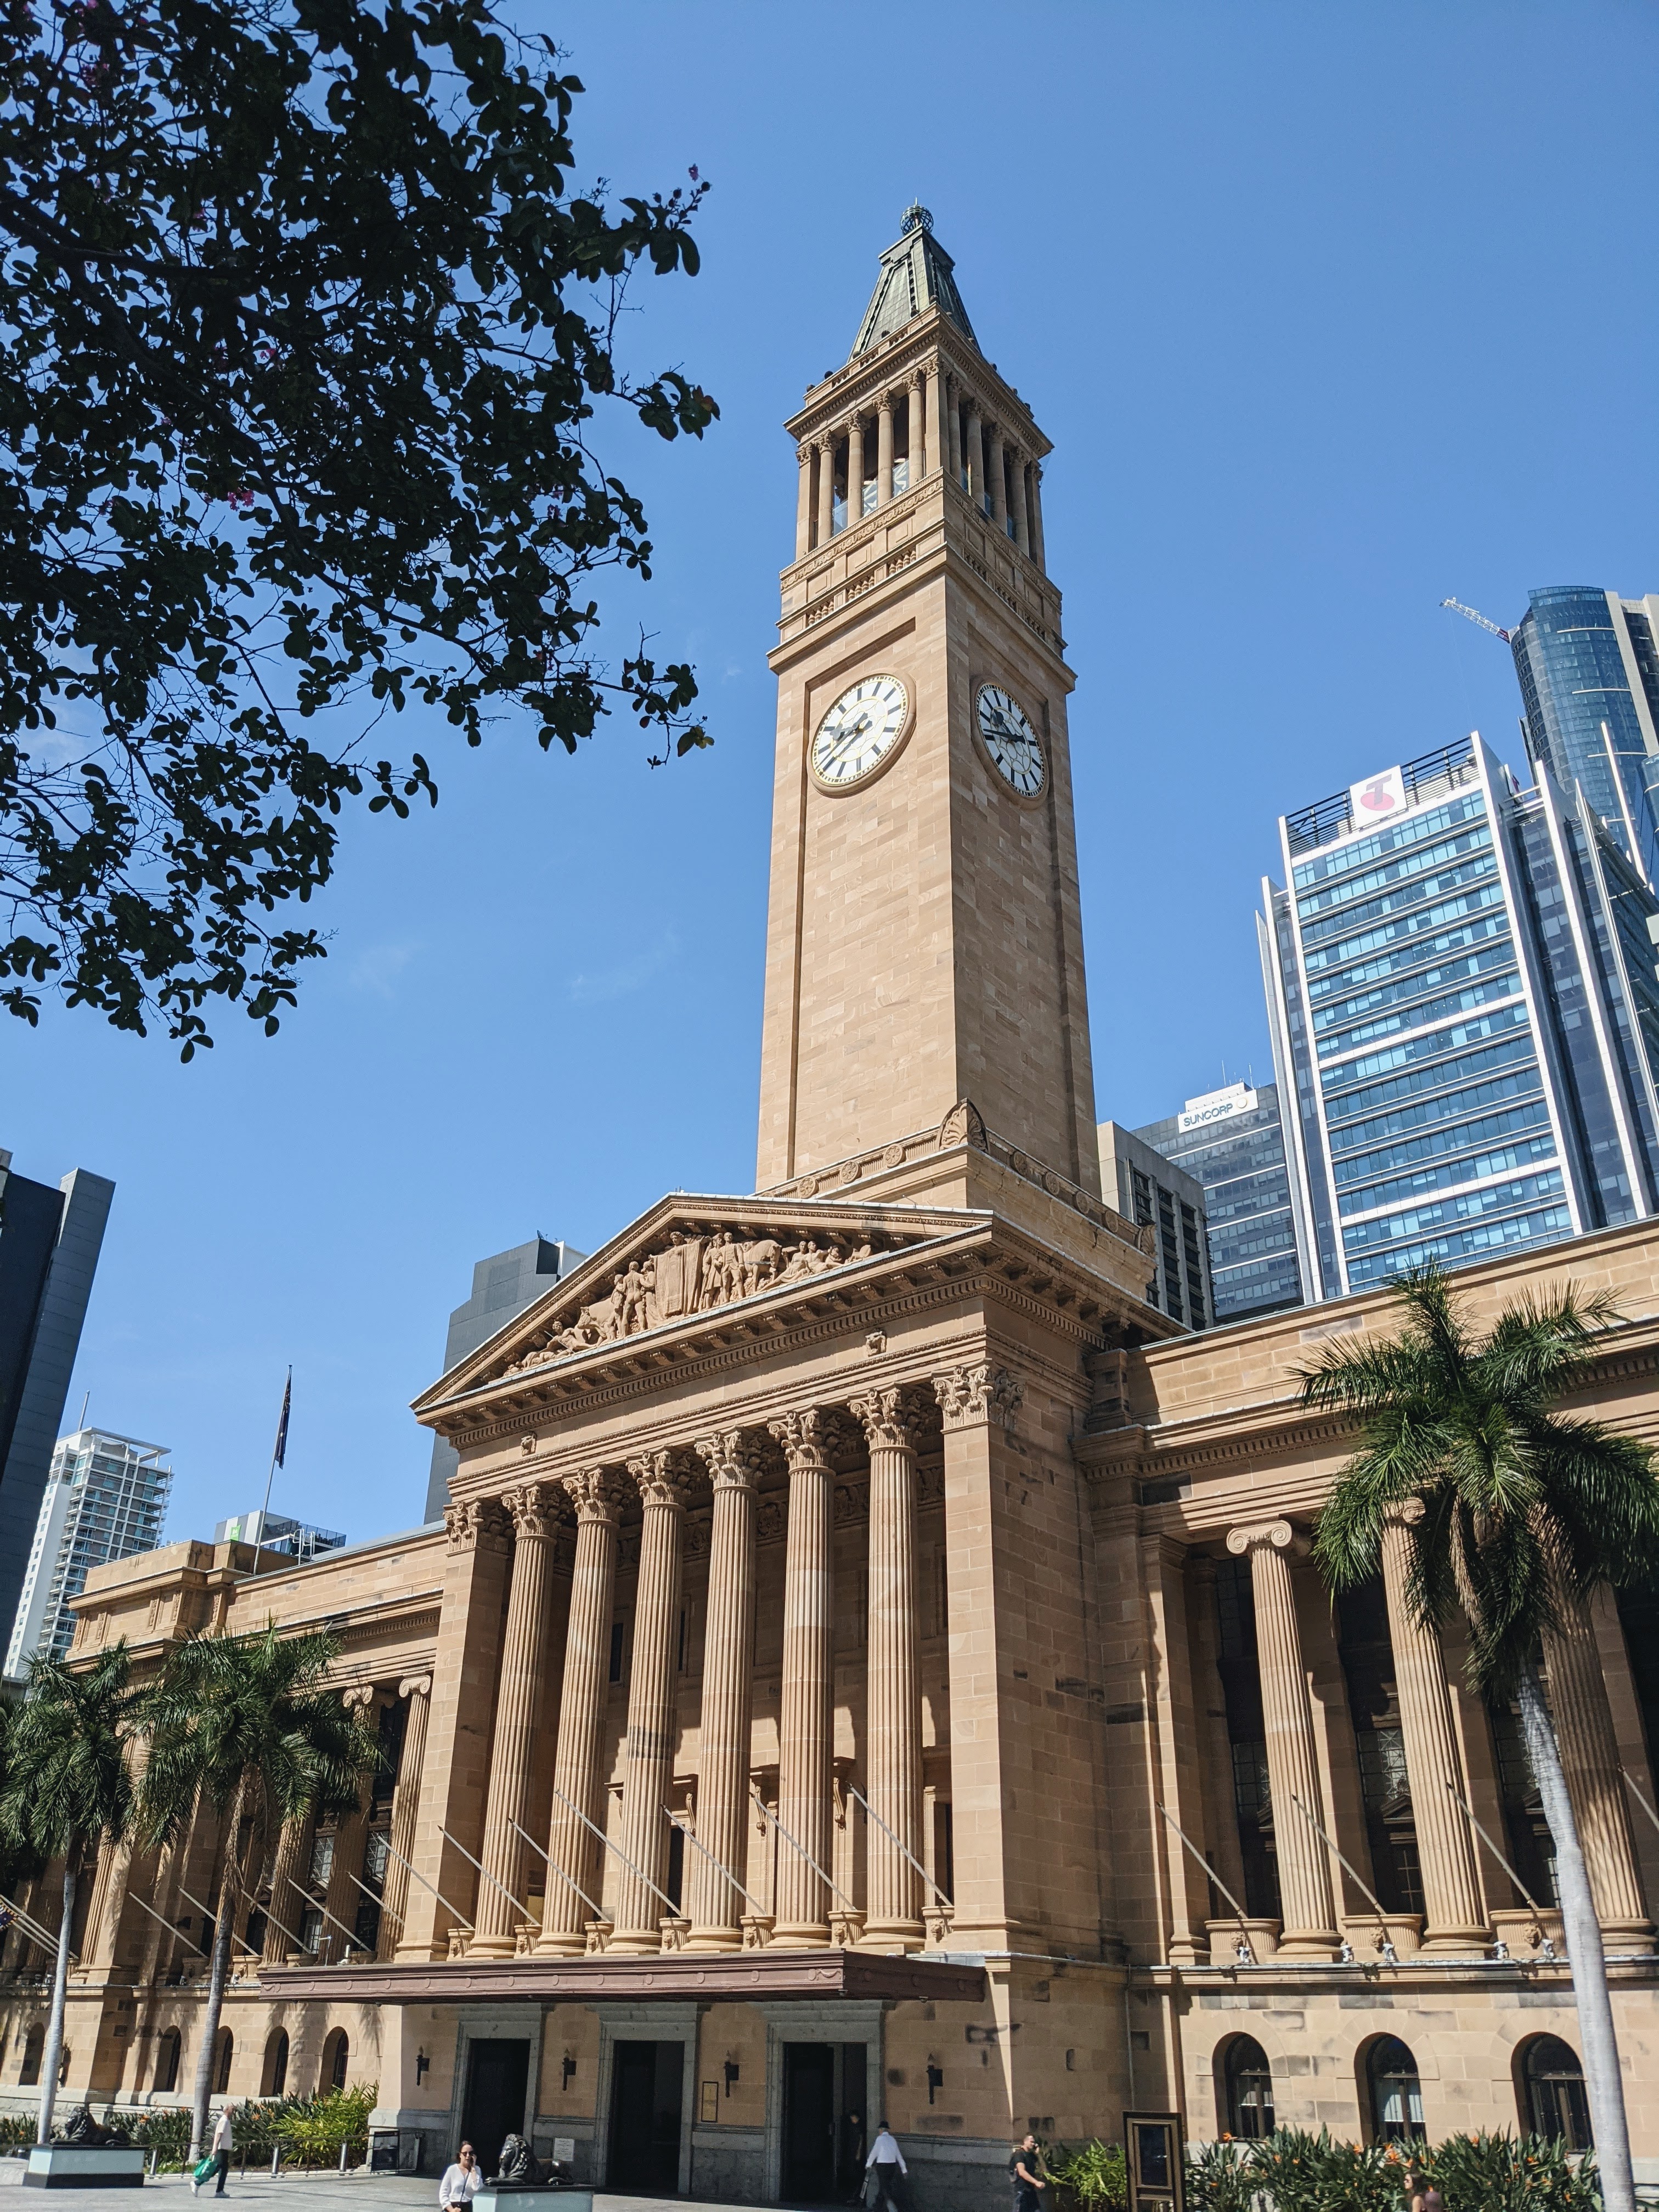 A view of Brisbane City Hall in Australia, featuring its prominent clock tower under a clear blue sky. The building showcases classical architecture with tall columns and detailed stonework, set against a backdrop of modern skyscrapers. Palm trees and a few people walking add to the vibrant urban atmosphere.